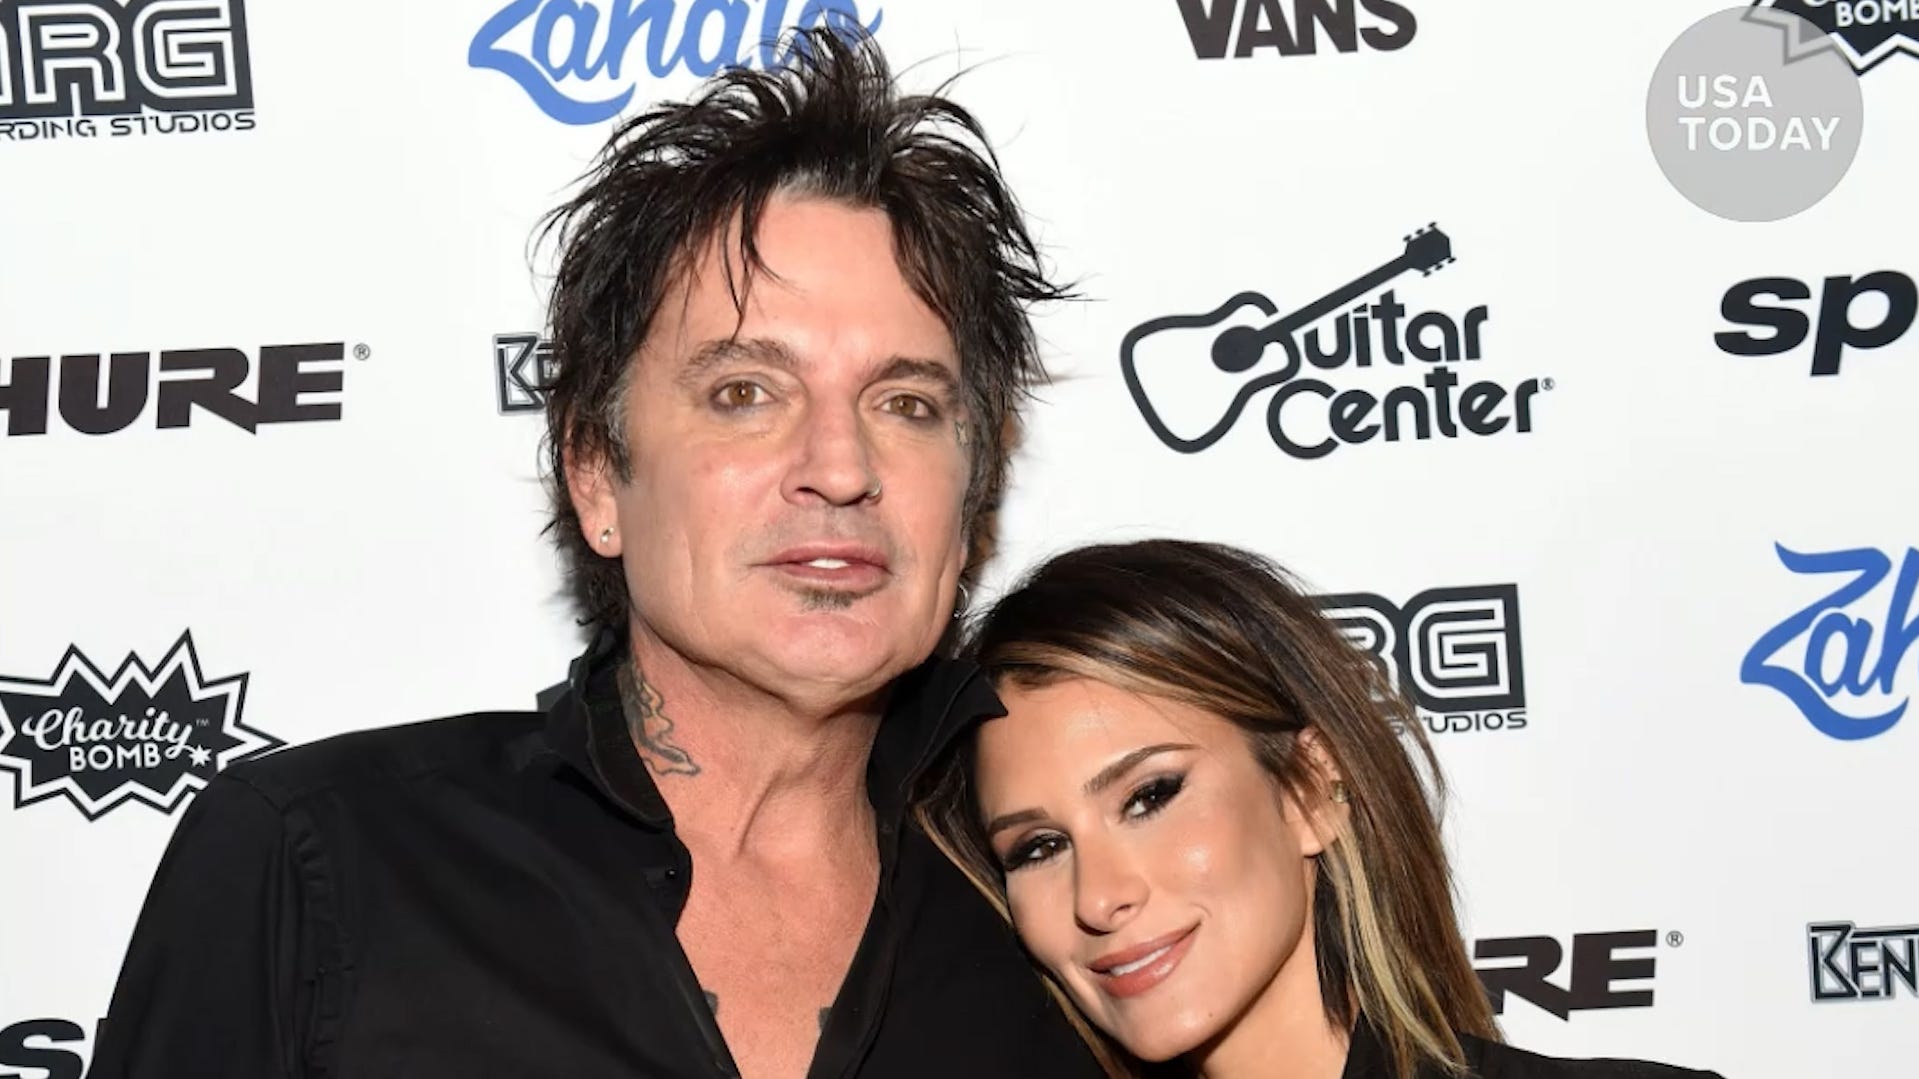 Tommy Lee married on Valentine's Day